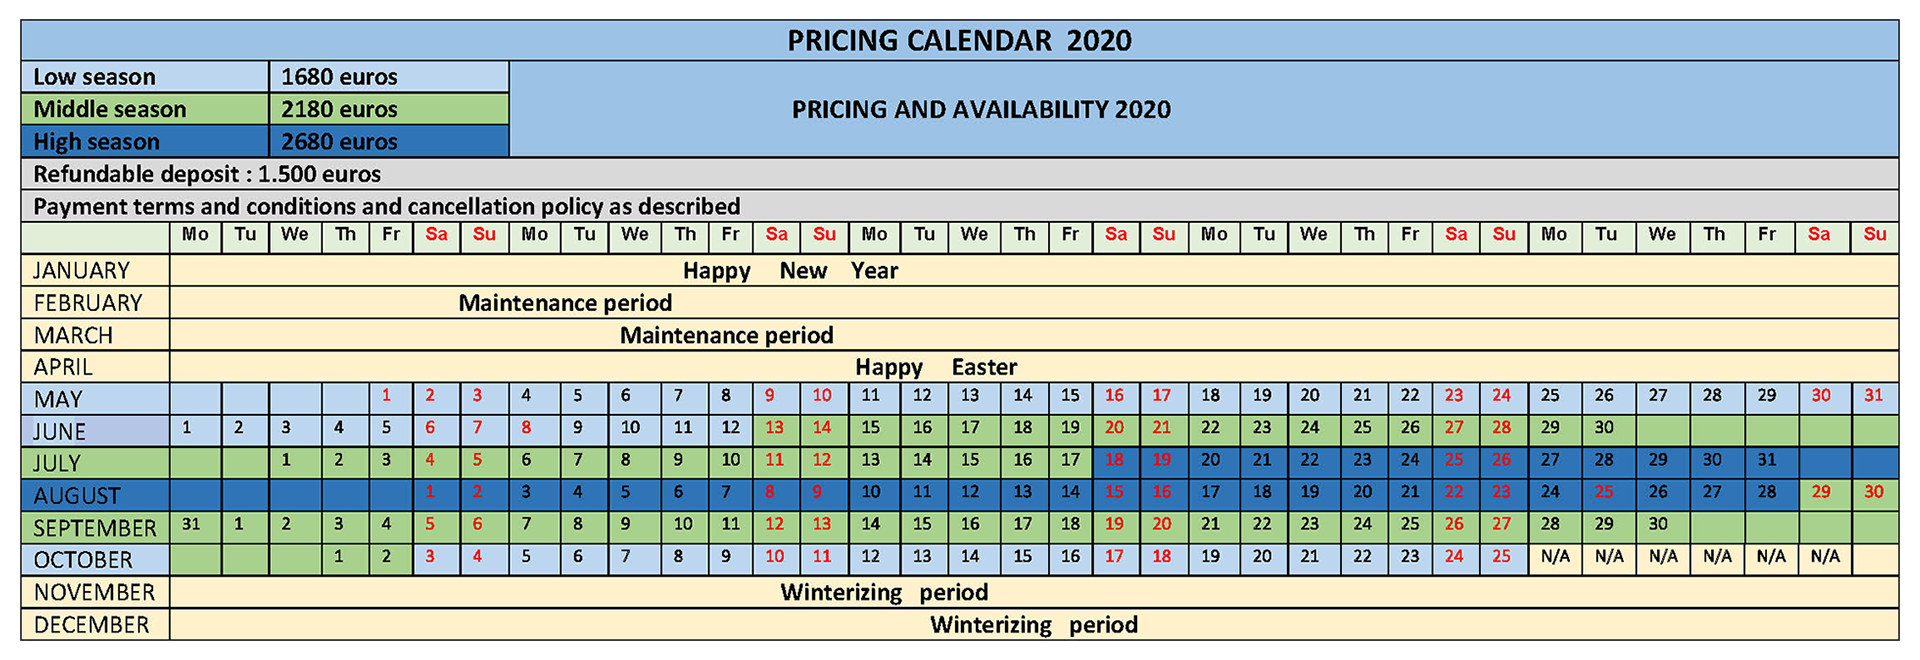 yacht-pricing-calendar-2020.png